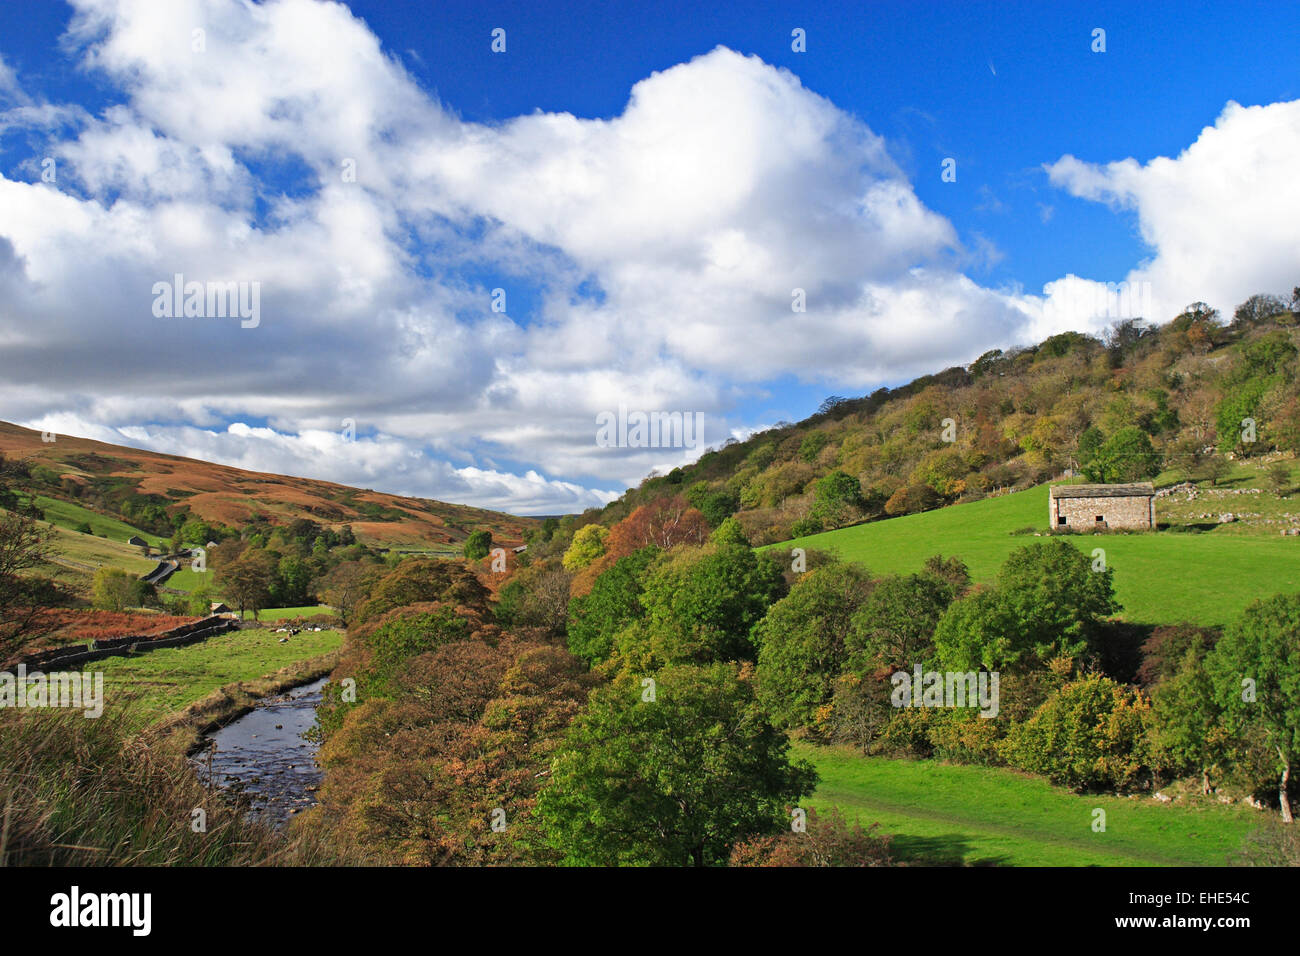 Autumn colour along the River Wharfe in Langstrothdale plus stone barn / Yorks Dales NP / Yorkshire / UK Stock Photo